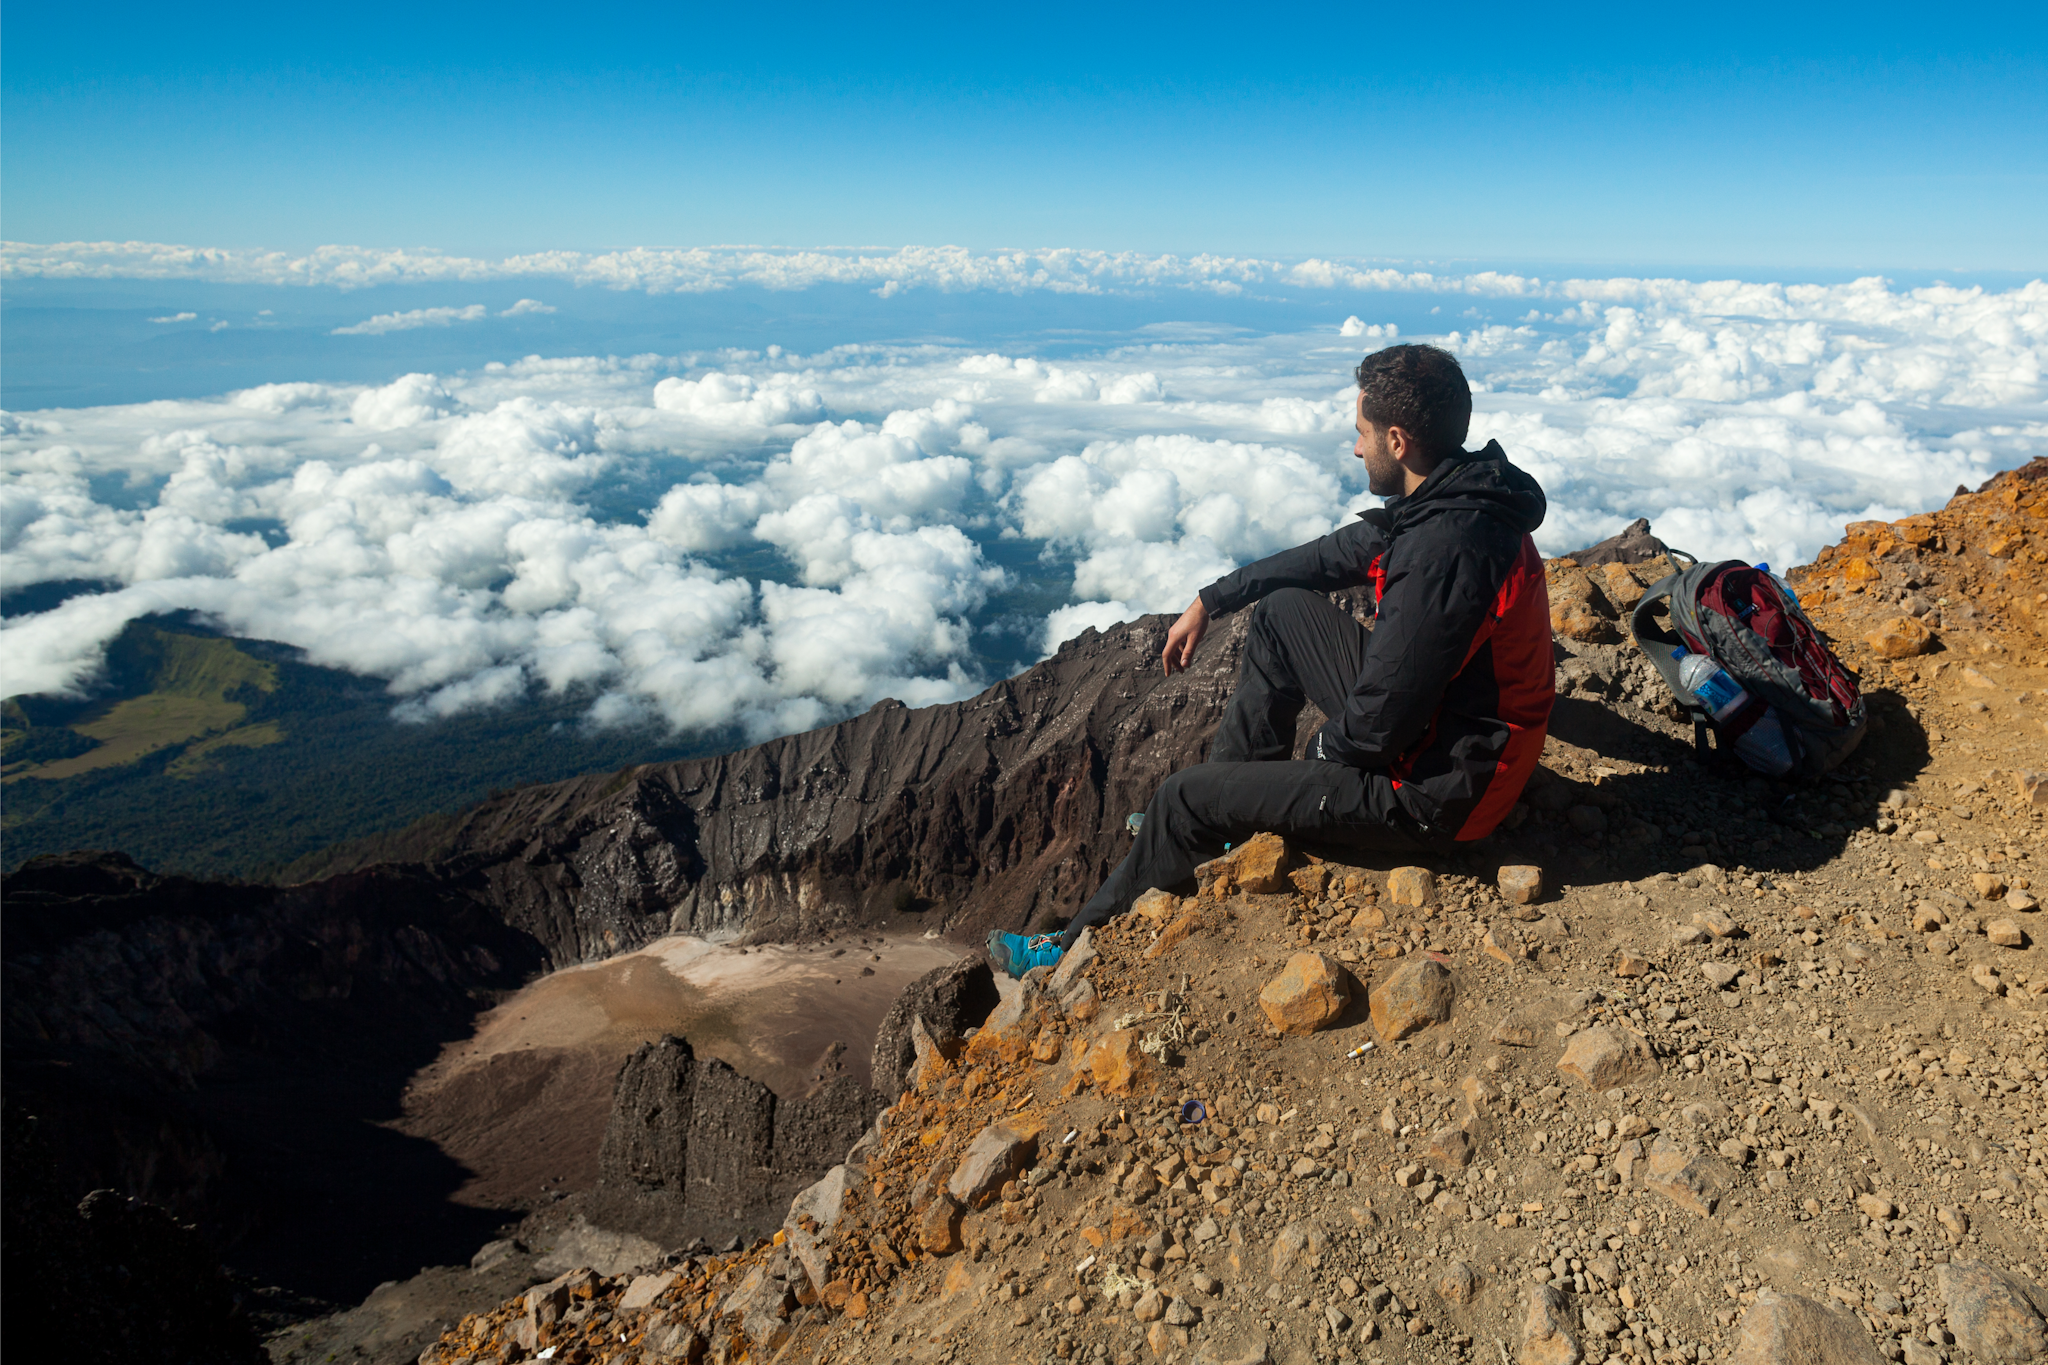 Man looking out over clouds on Mount Rinjani, Indonesia. Photo: Canva